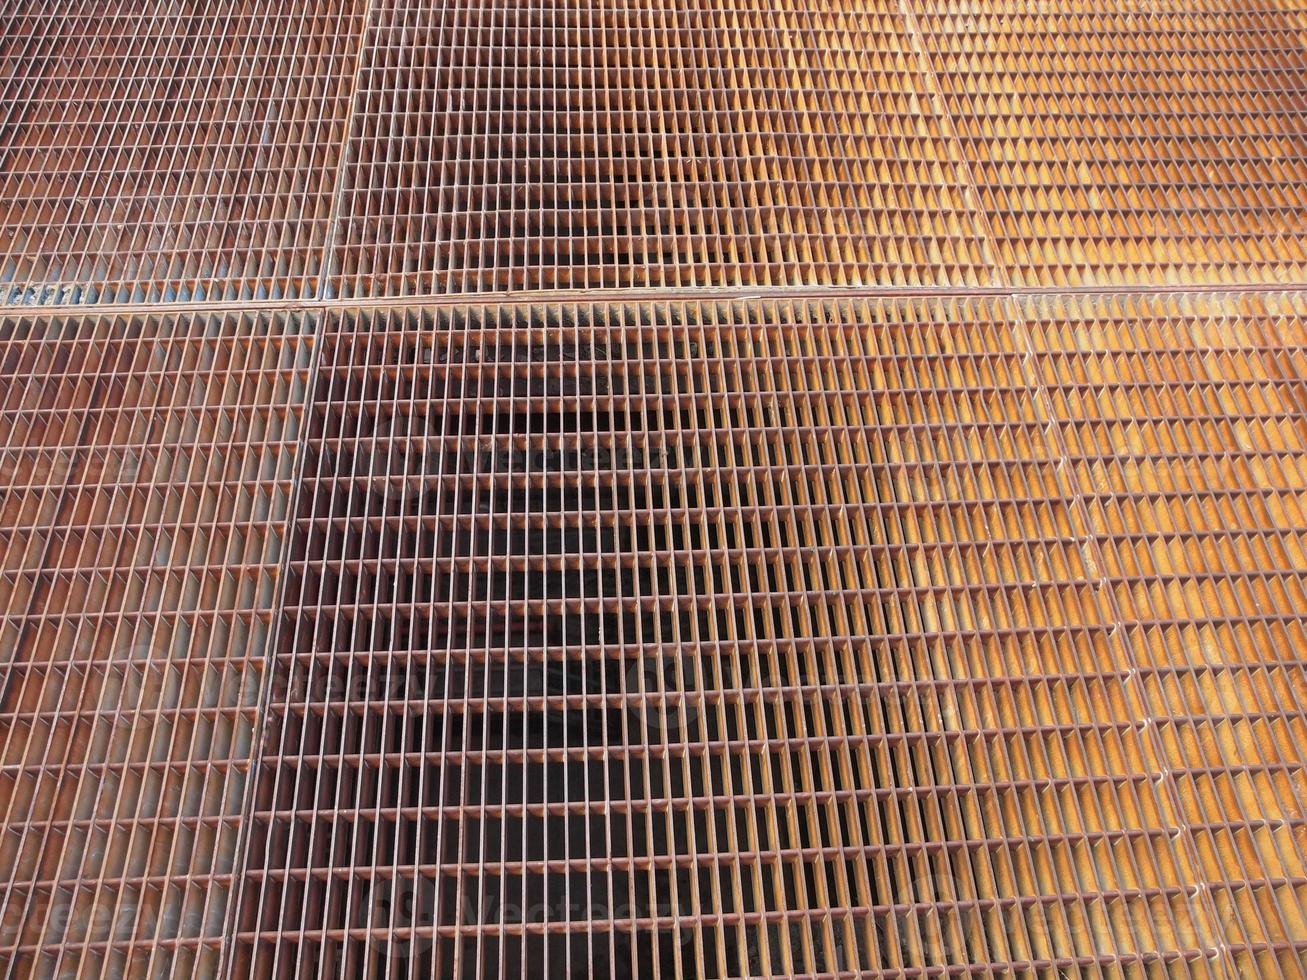 Rusted grid mesh photo